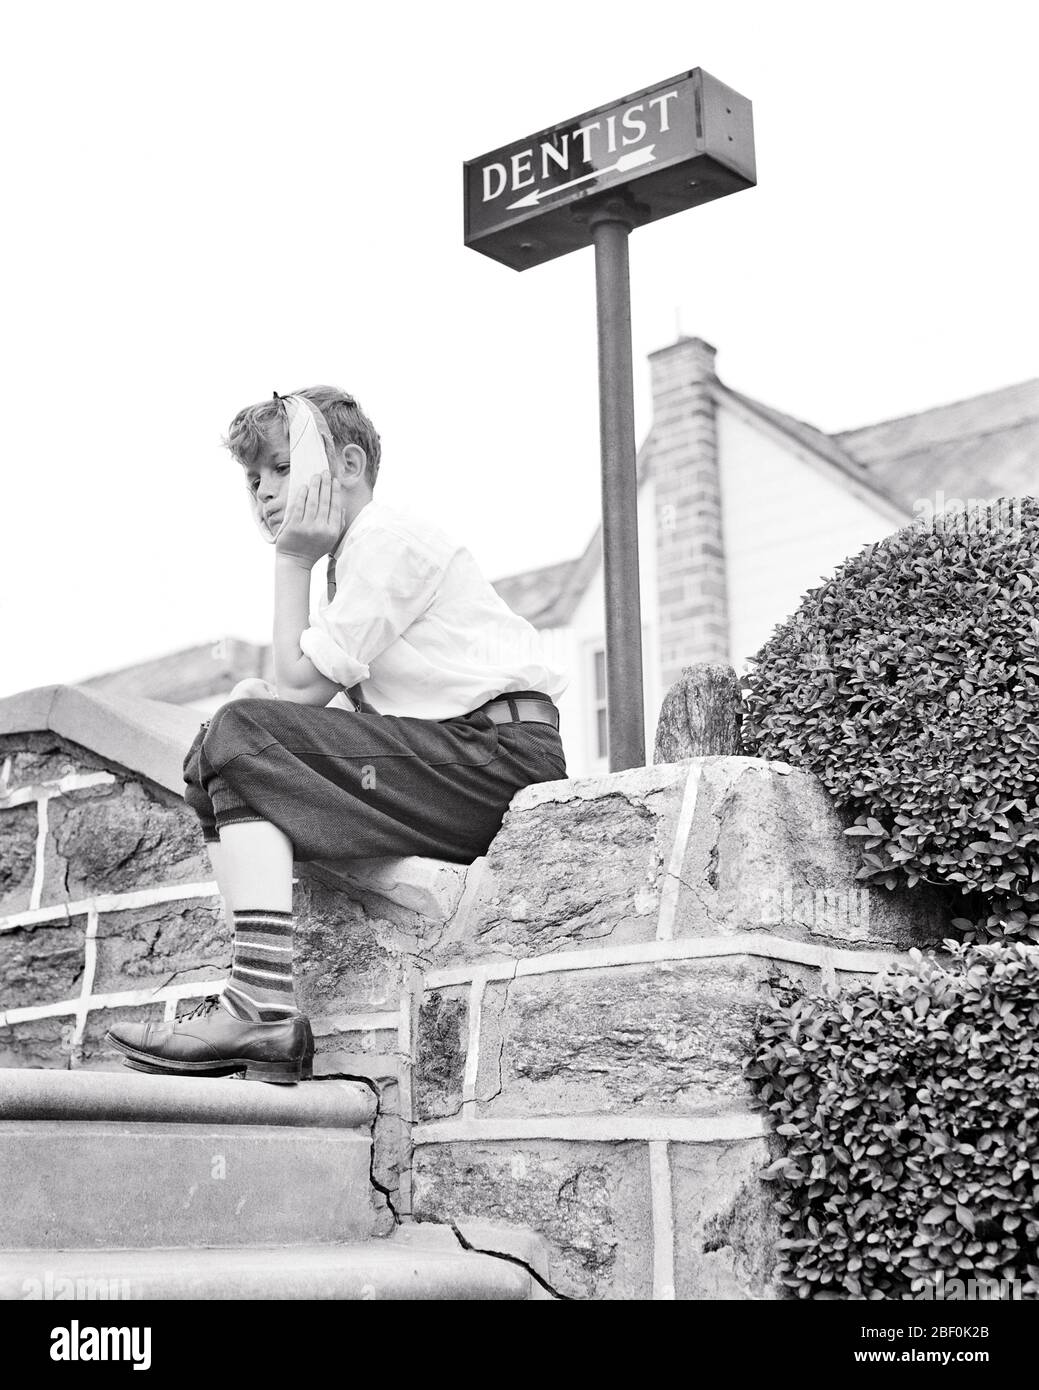 1930s 1940s BOY SITTING ON STONE WALL UNDER A SIGN POINTING TO DENTIST OFFICE HOLDING HIS FACE  SUFFERING TOOTHACHE  - b12235 HAR001 HARS B&W SADNESS DENTAL SUFFERING HIS LOW ANGLE AGONY DIRECTION TOOTHACHE IRRITATION CONCEPTUAL TENDERNESS DISCOMFORT GROWTH JUVENILES PAINFUL SOLUTIONS ACHE BLACK AND WHITE CAUCASIAN ETHNICITY HAR001 OLD FASHIONED Stock Photo